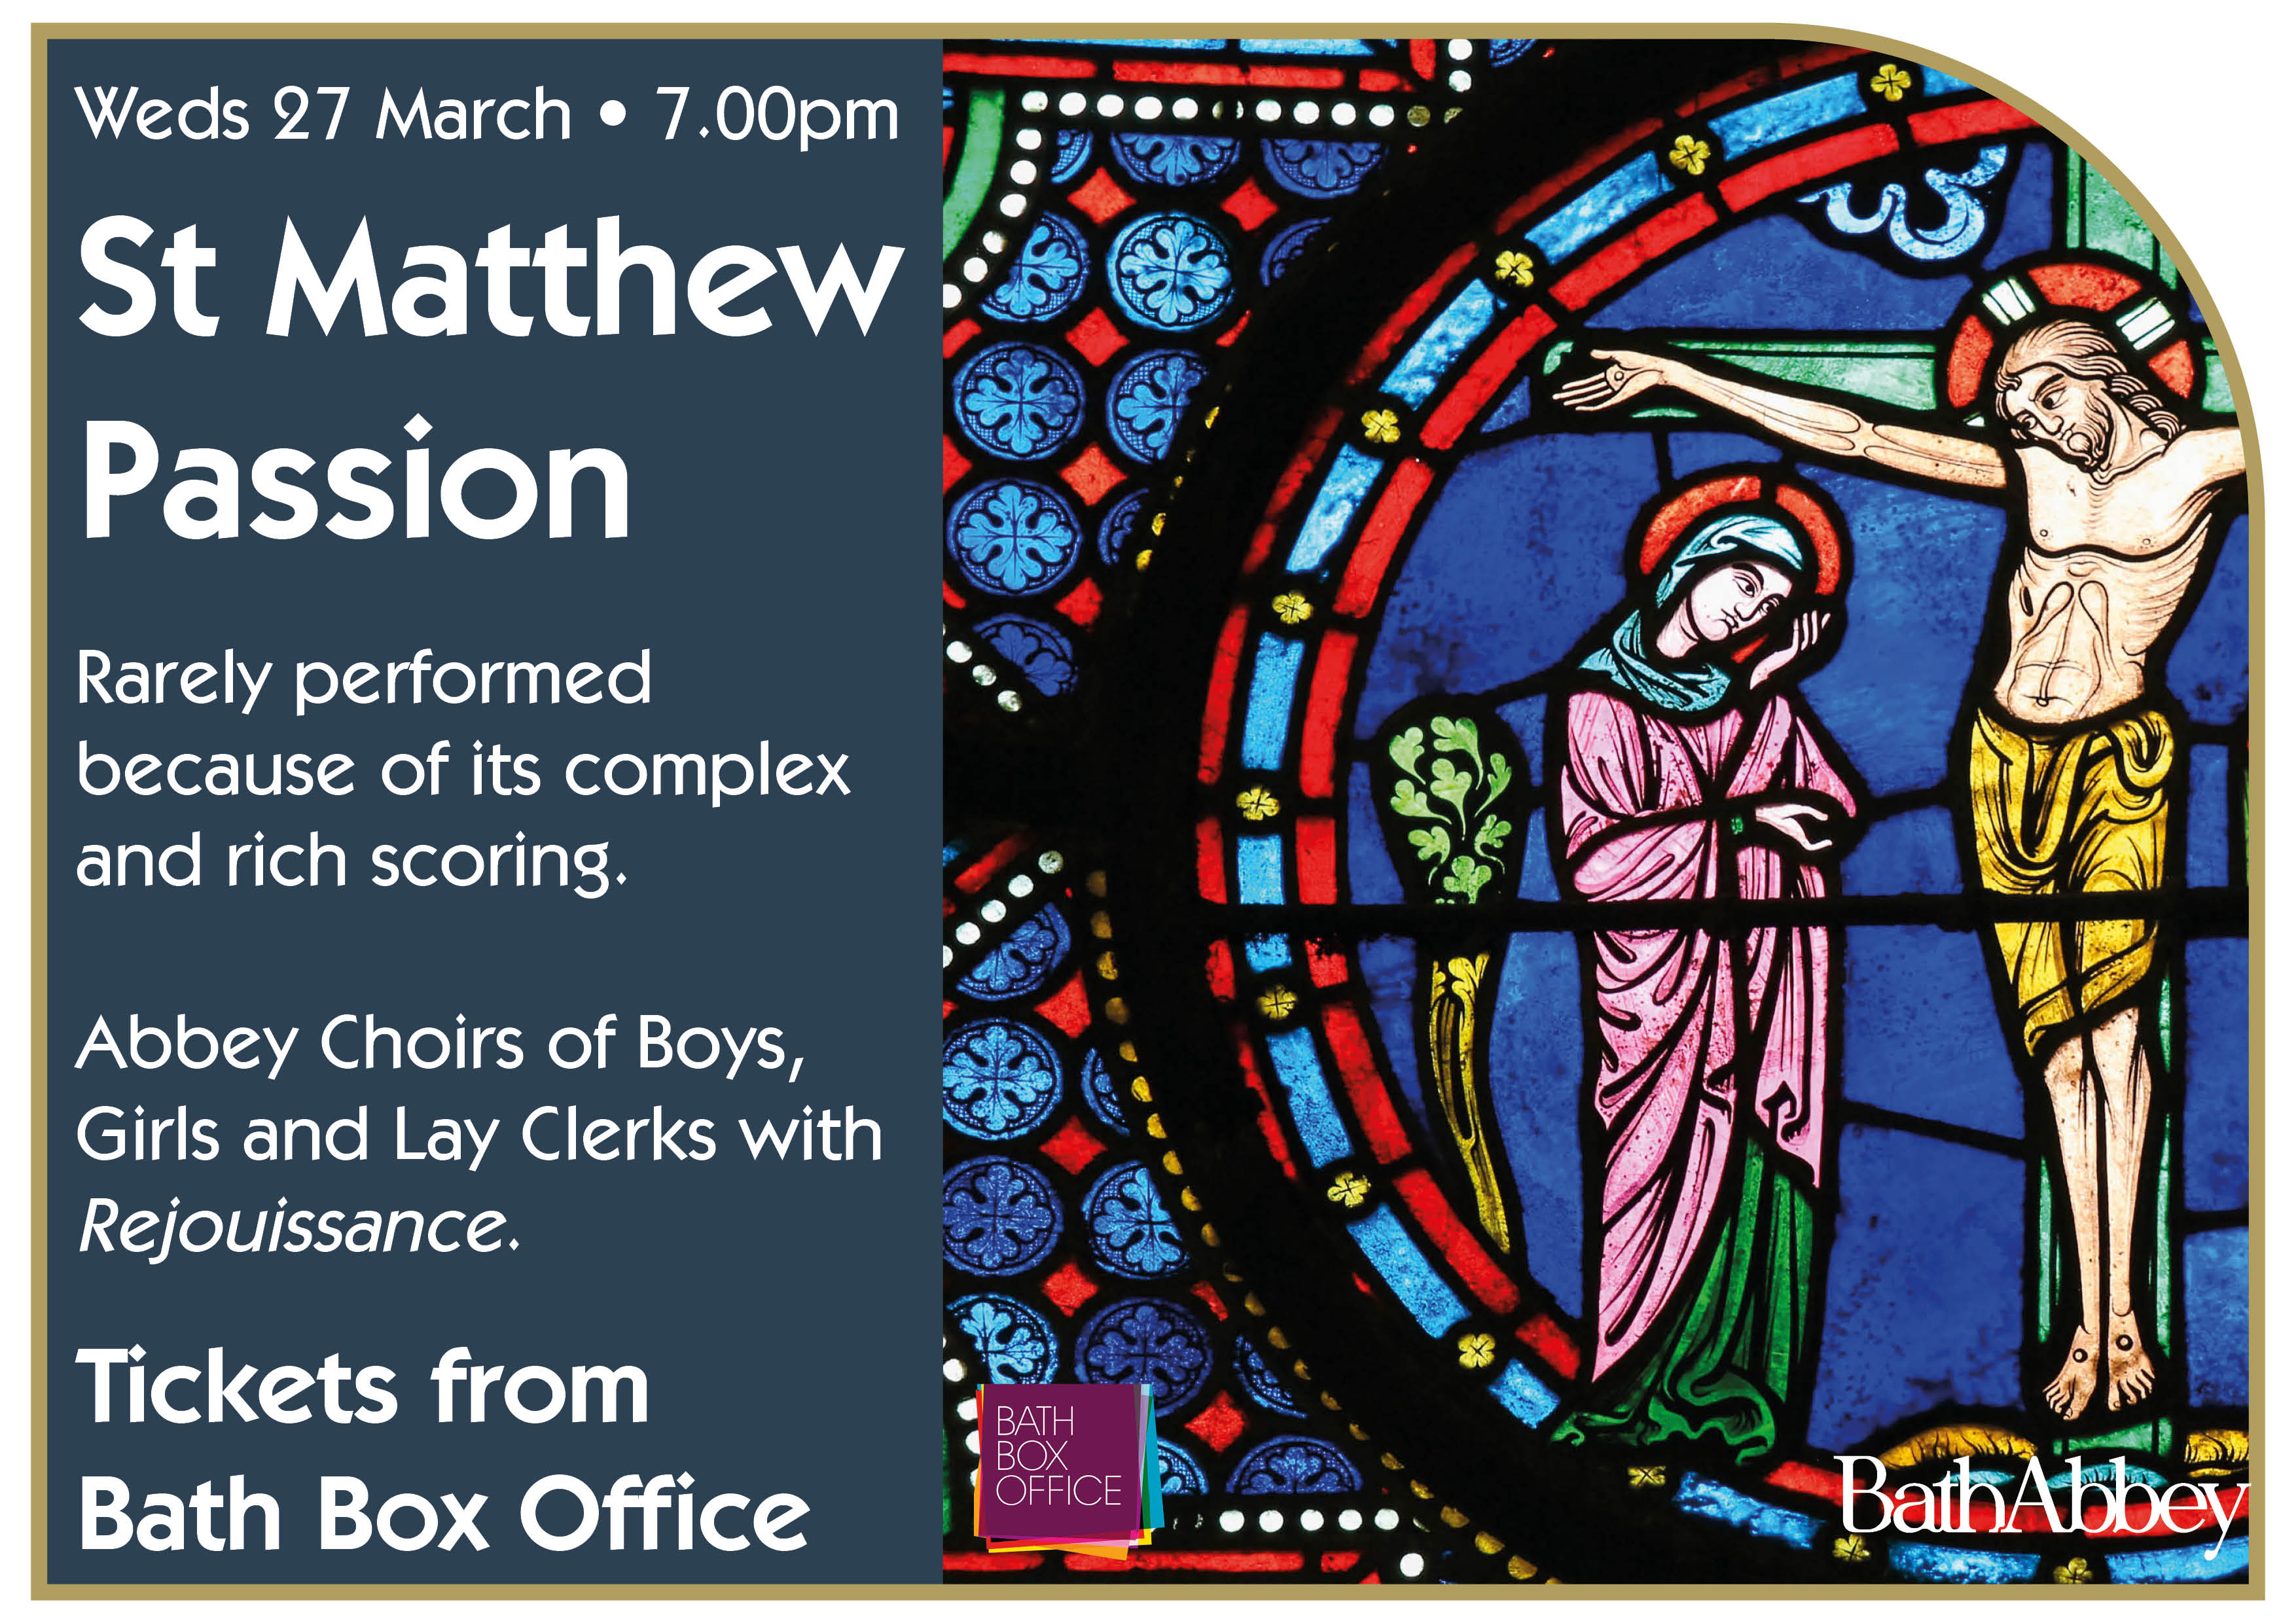 St Matthew Passion at Bath Abbey, 27th March at 7pm. Tickets from the Bath Box Office